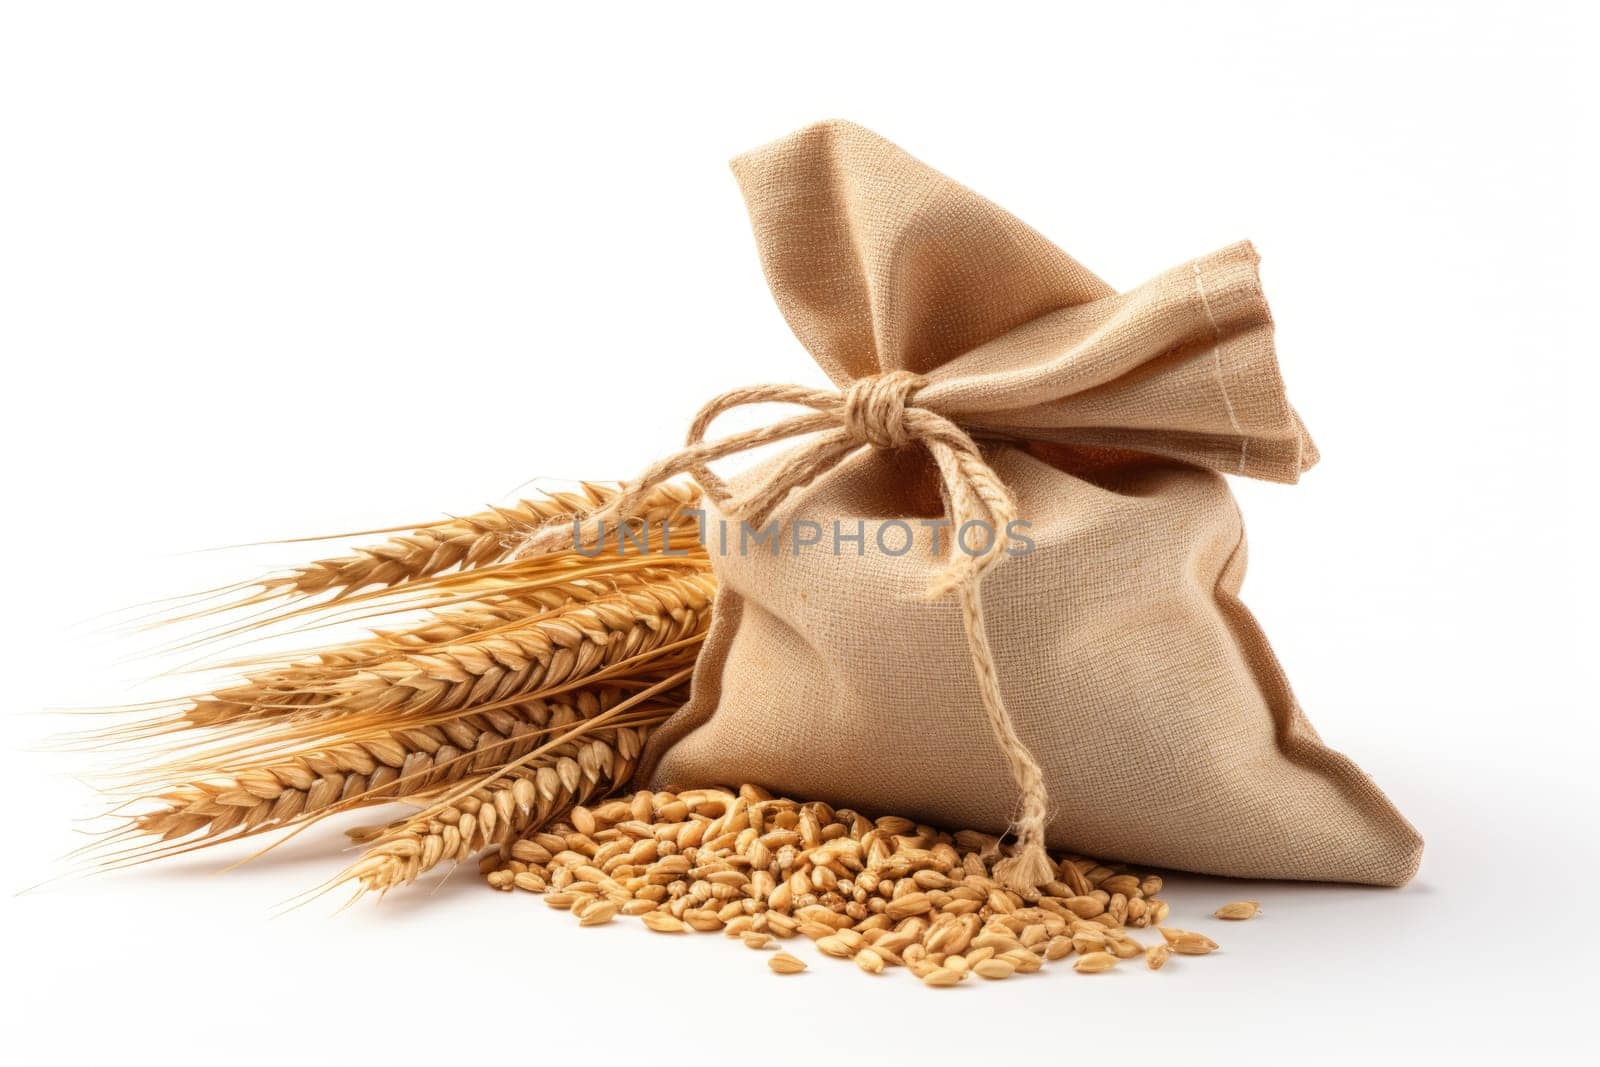 Sack of wheat and ears of wheat on a white background. Quality products, healthy eating. Generated by artificial intelligence